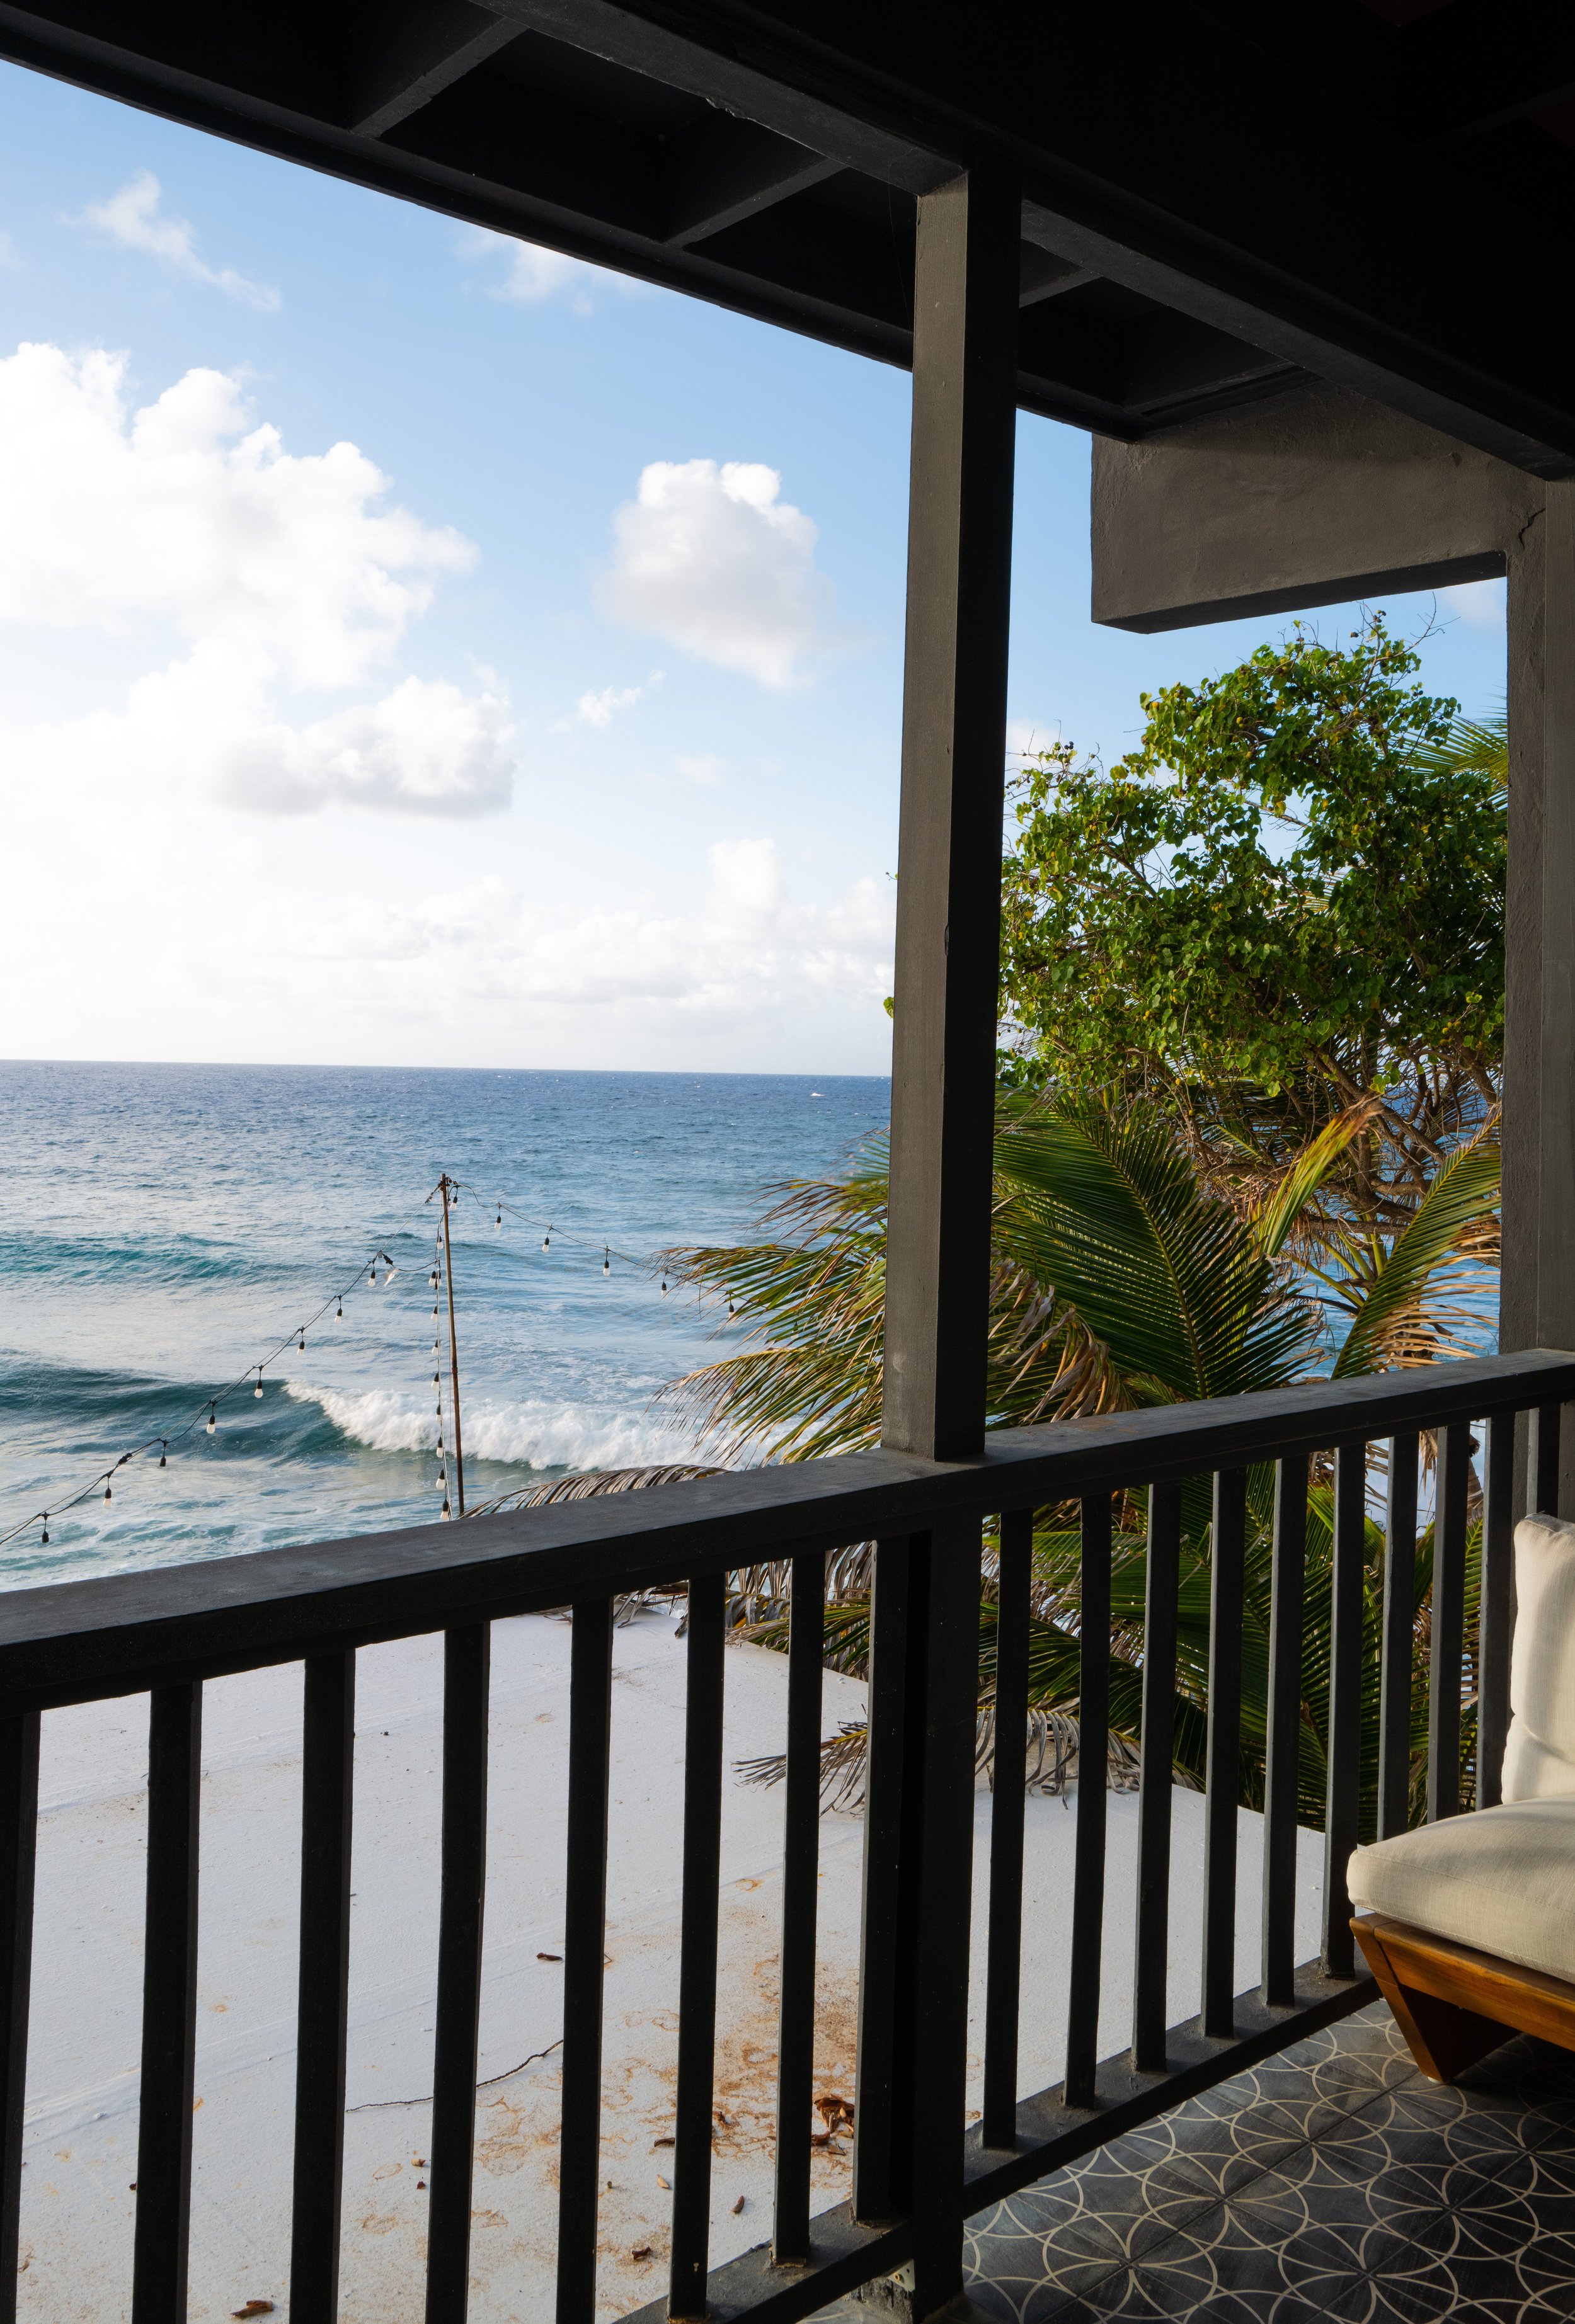 The Waves at Cane Bay Hotel in St Croix